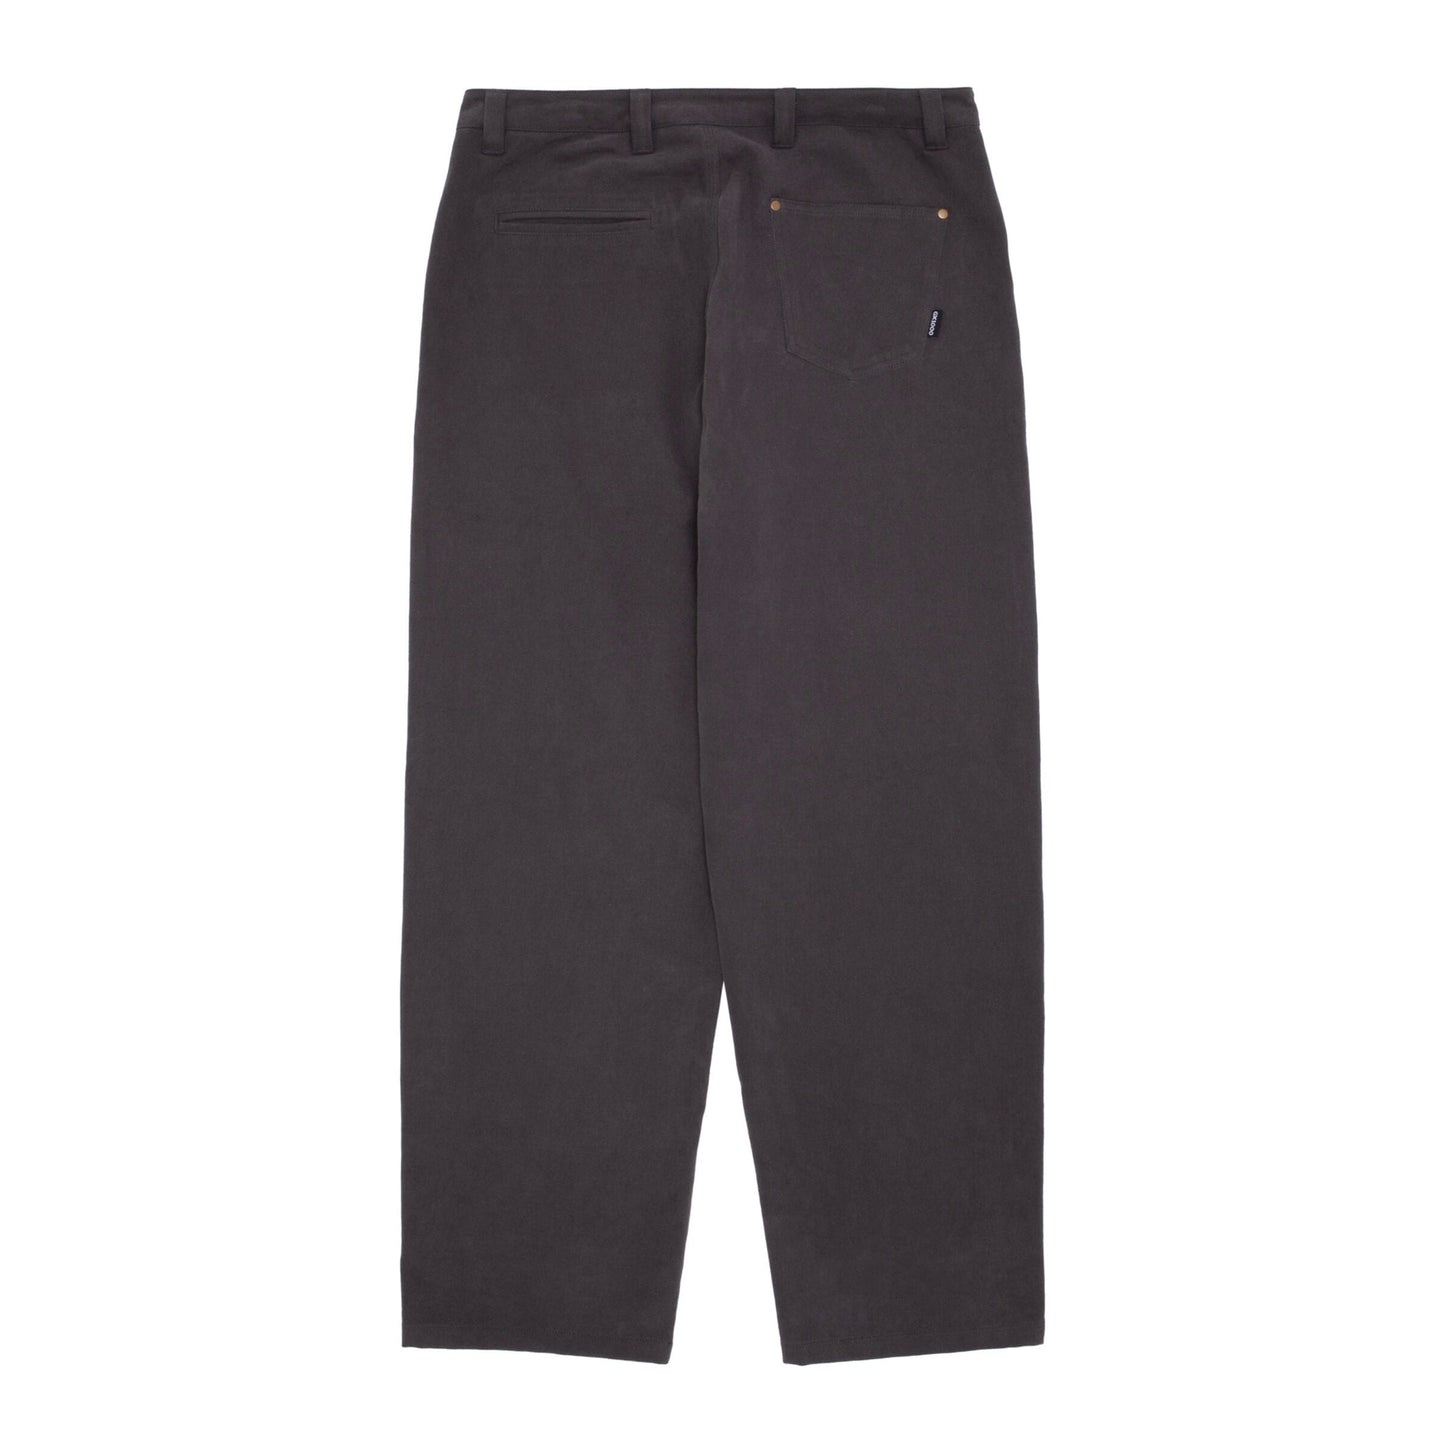 GX1000 | Double Knee Pant - Charcoal